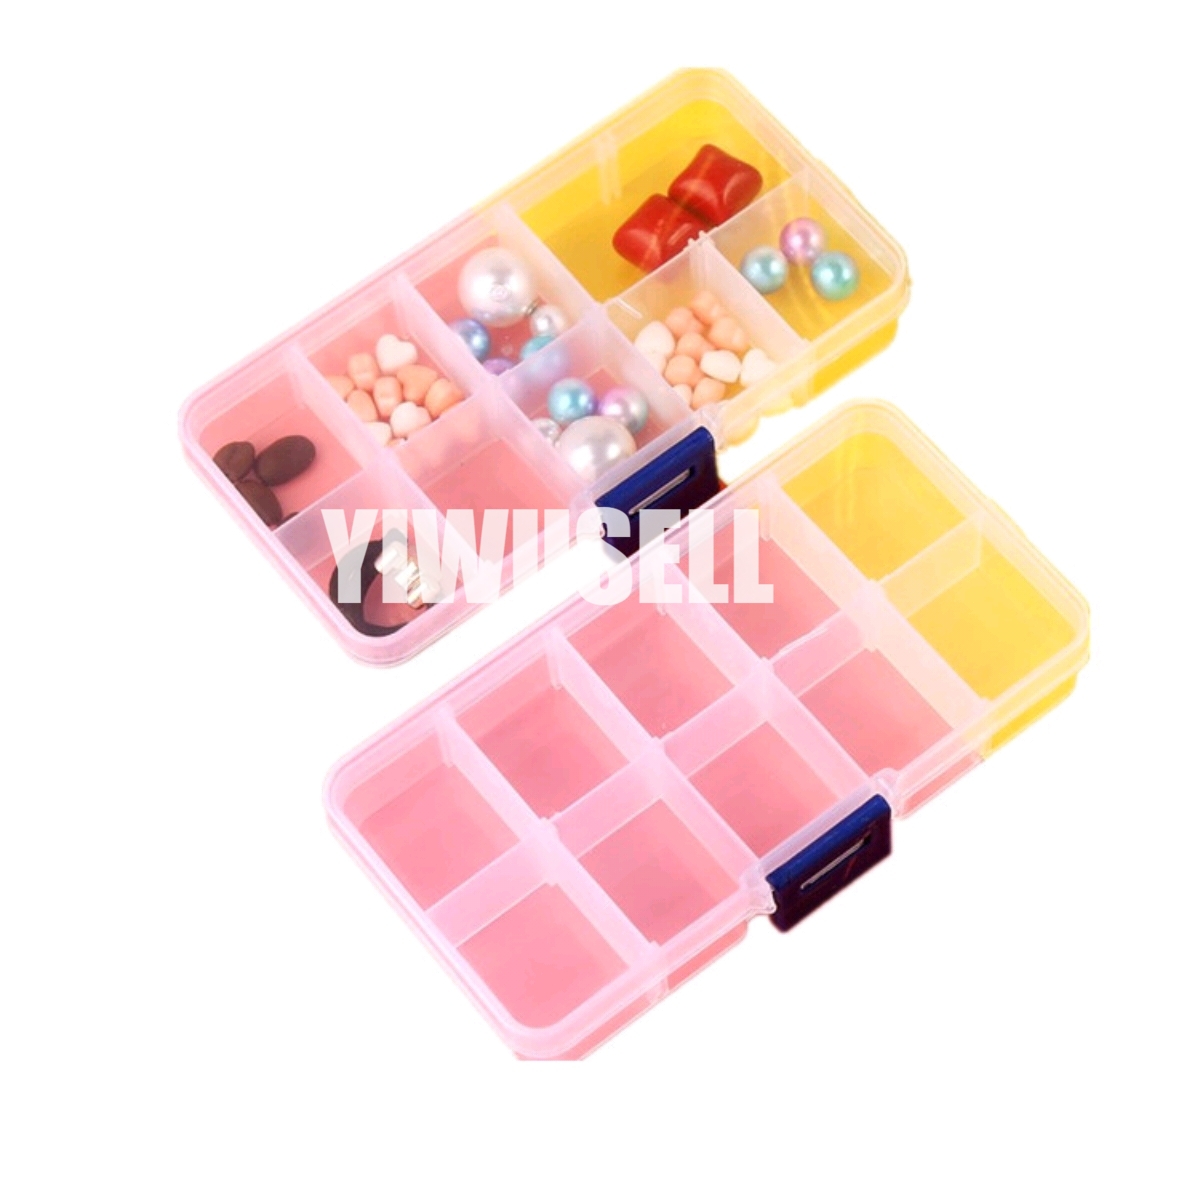 Best Transparent Plastic Grid Box Storage Organizer for sale -  YIWUSELL, HOME, KITCHEN, PET, CAMPING, STATIONERY, TOOLS